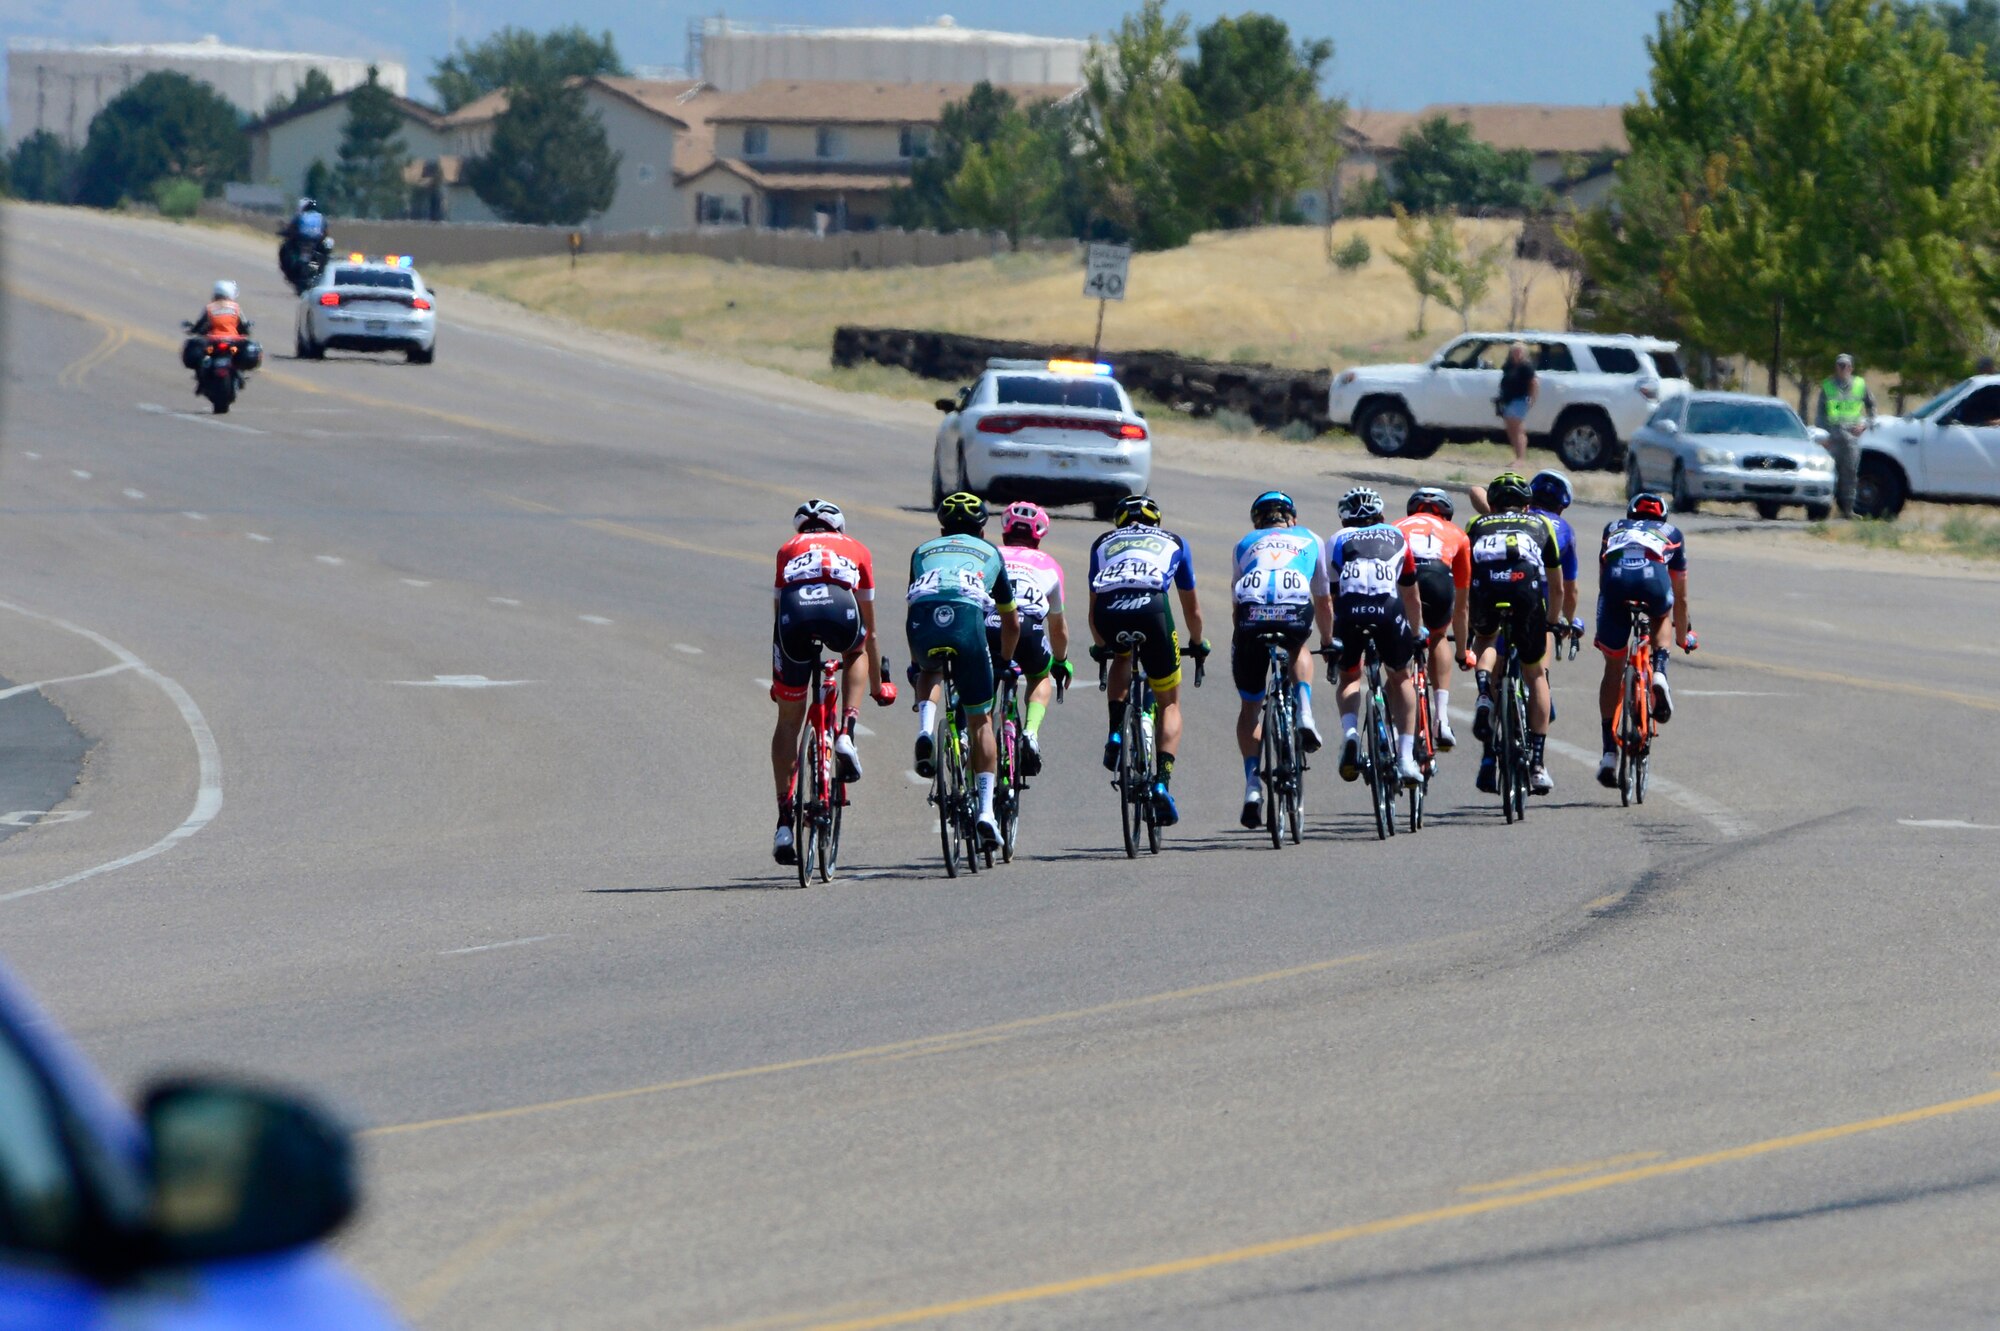 A breakaway of 10 riders during stage 3 of the 2018 Tour of Utah road race Aug. 9, 2018, at Hill Air Force Base, Utah. The Tour of Utah is one of the top professional cycling events in the country and showcases some of the world’s best teams and cyclists. Stage 3 of the multiday race took riders on a 116-mile route from Antelope Island to Layton and included a loop through the installation. (U.S. Air Force photo by David Perry)